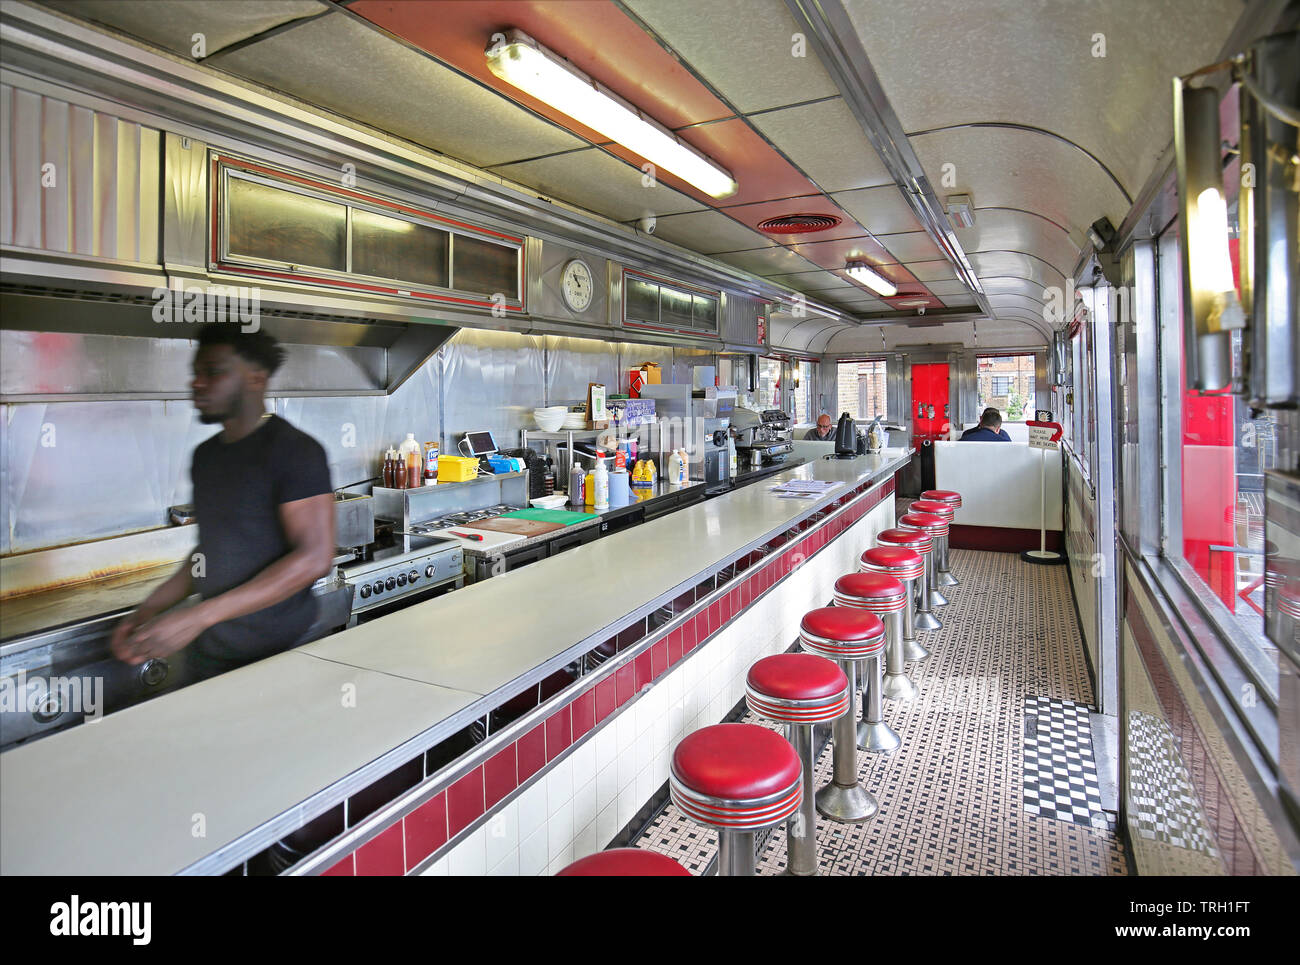 Interior of Fat Boys Diner, the American-style café and restaurant at Trinity Buoy Wharf next to the river Thames at Canning Town in London, UK. Stock Photo